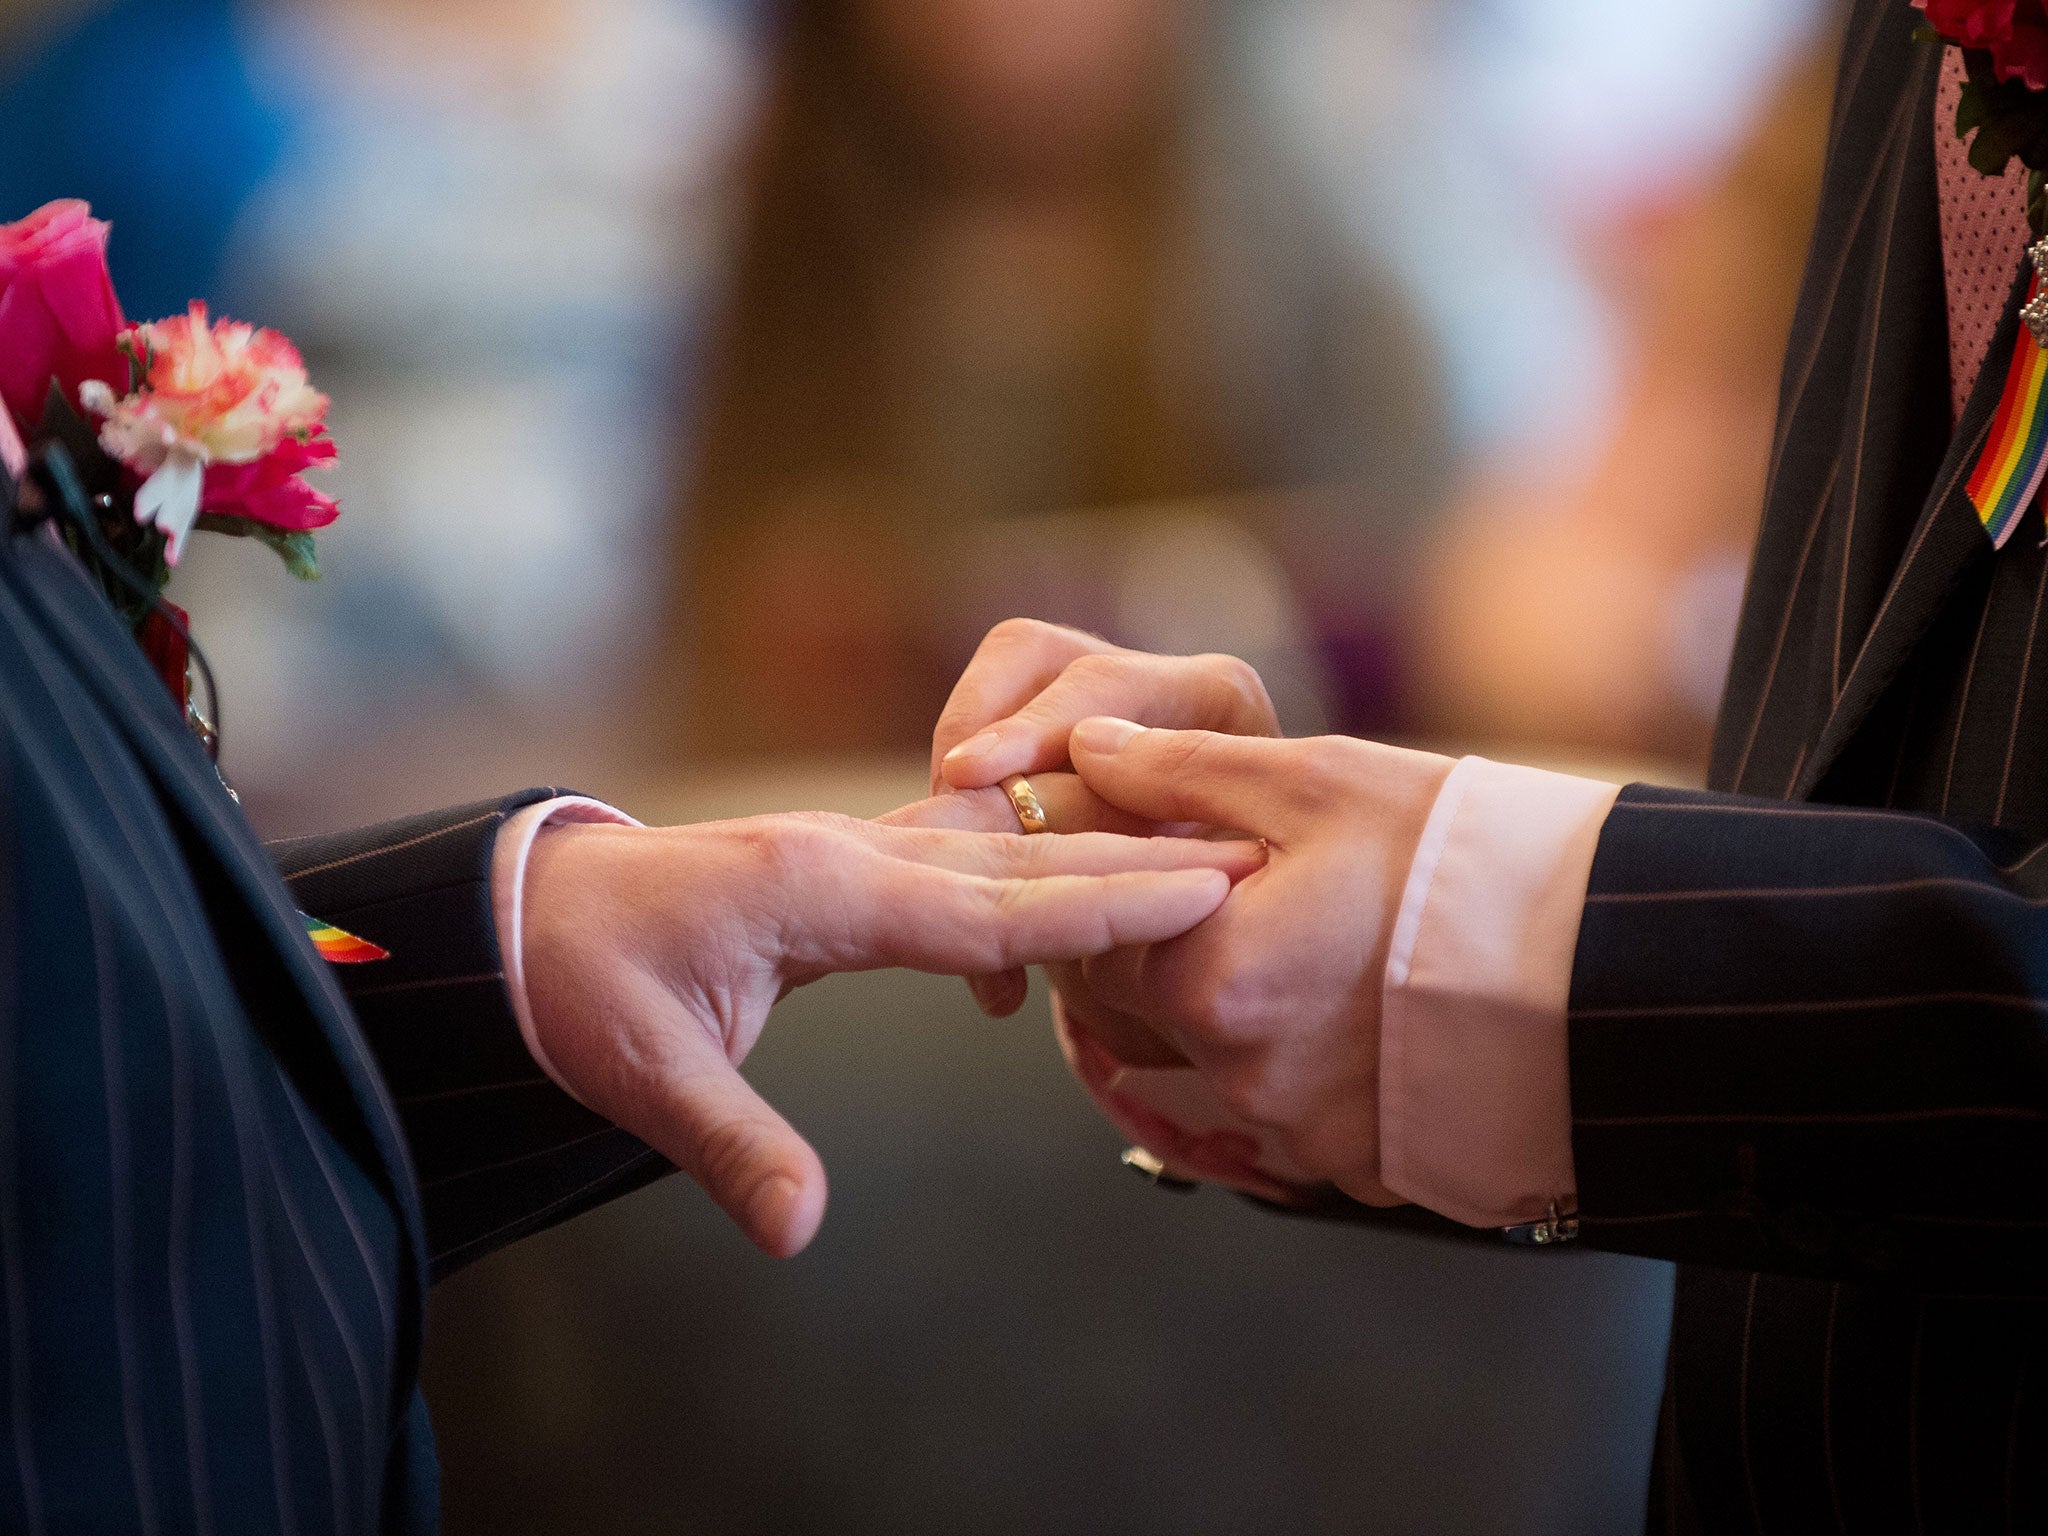 Phil Robathan (L) and James Preston (R) exchange rings during their wedding ceremony in Brighton on the day same-sex marriage was legalised